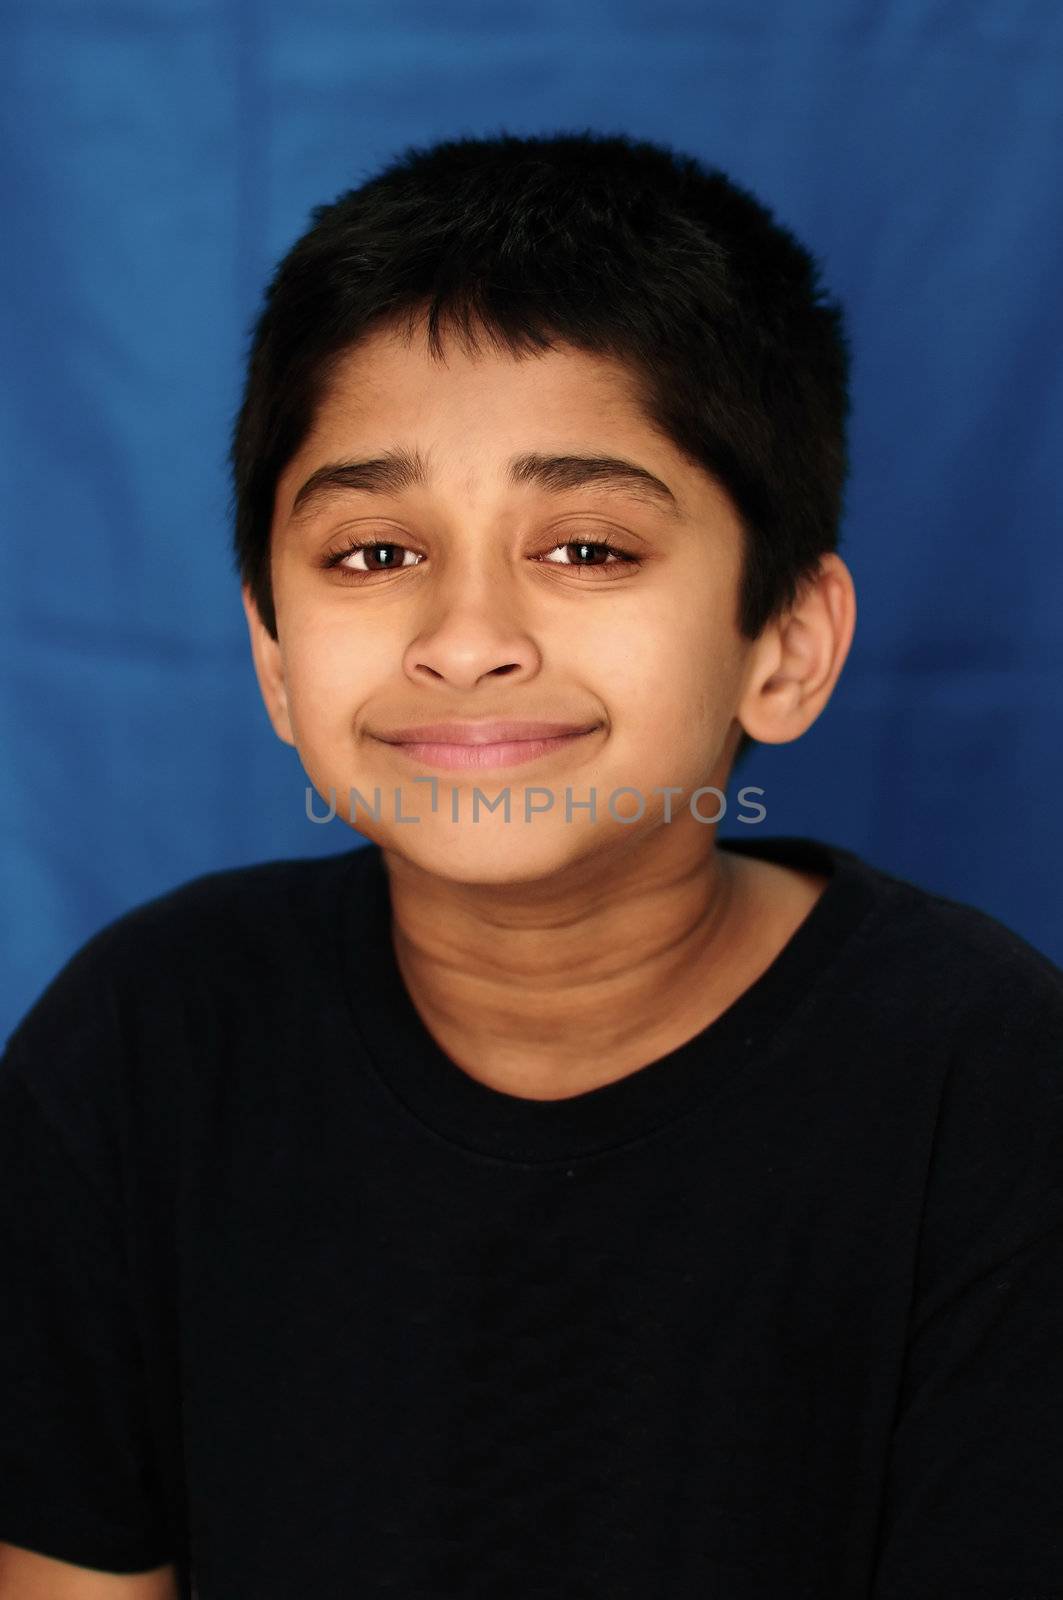 An handsome Indian kid showing happiness by miling